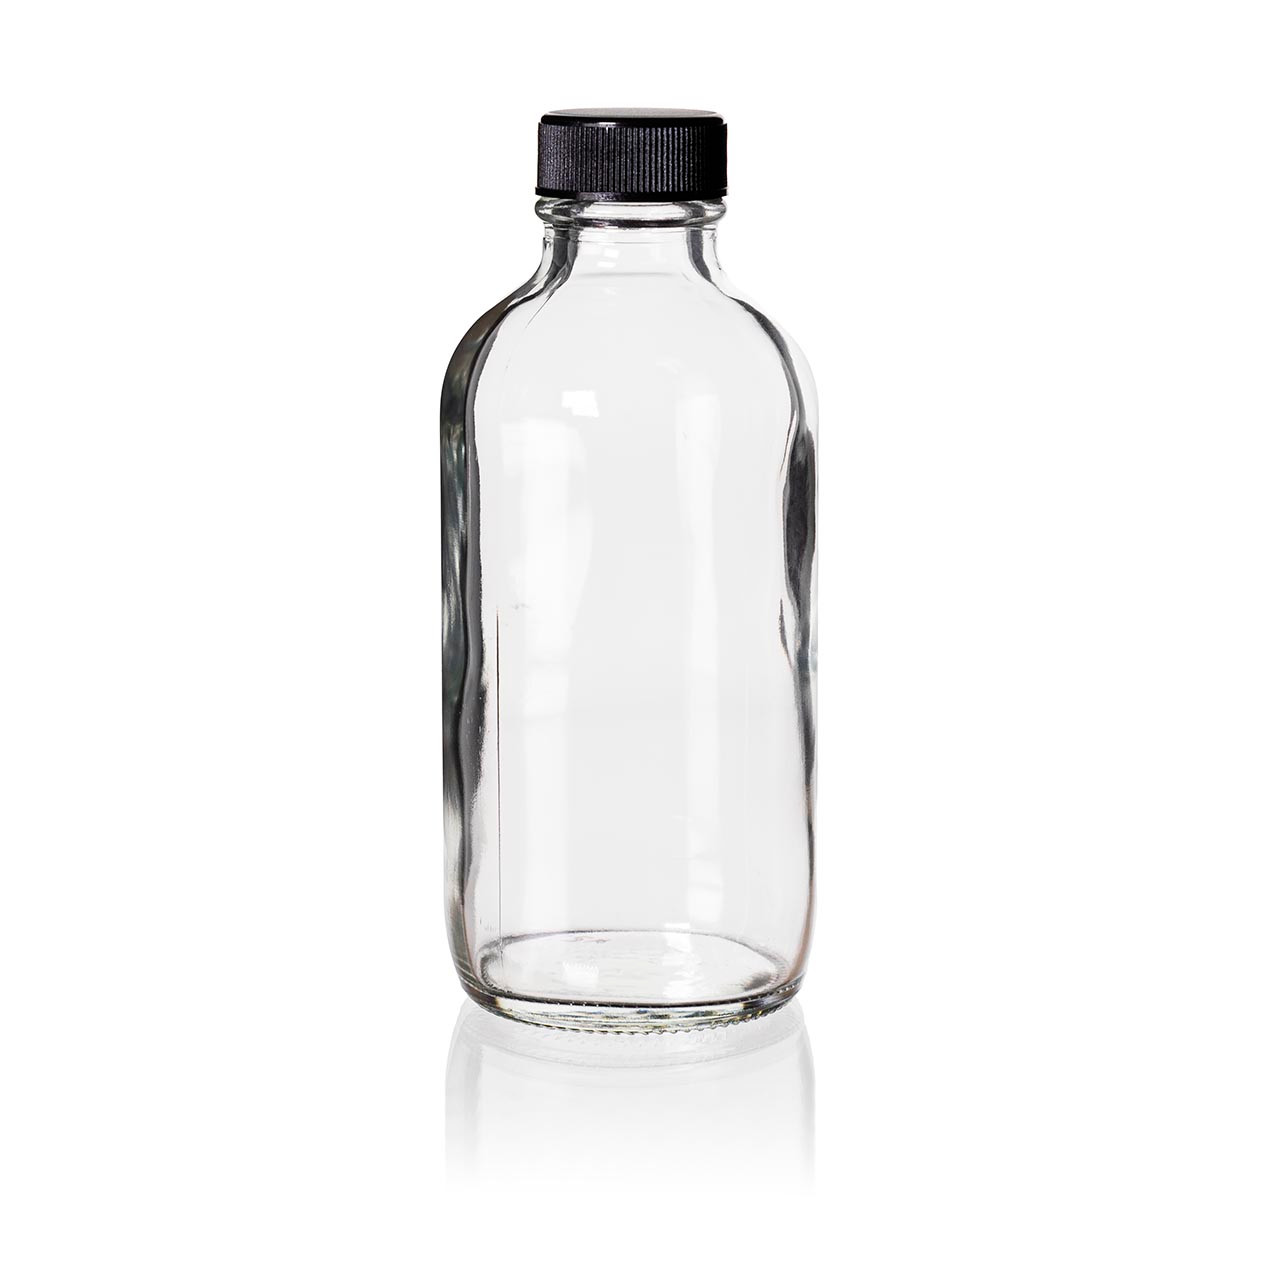 10 PCS Clear Glass Bottles with Lids Boston Round Sample Bottles